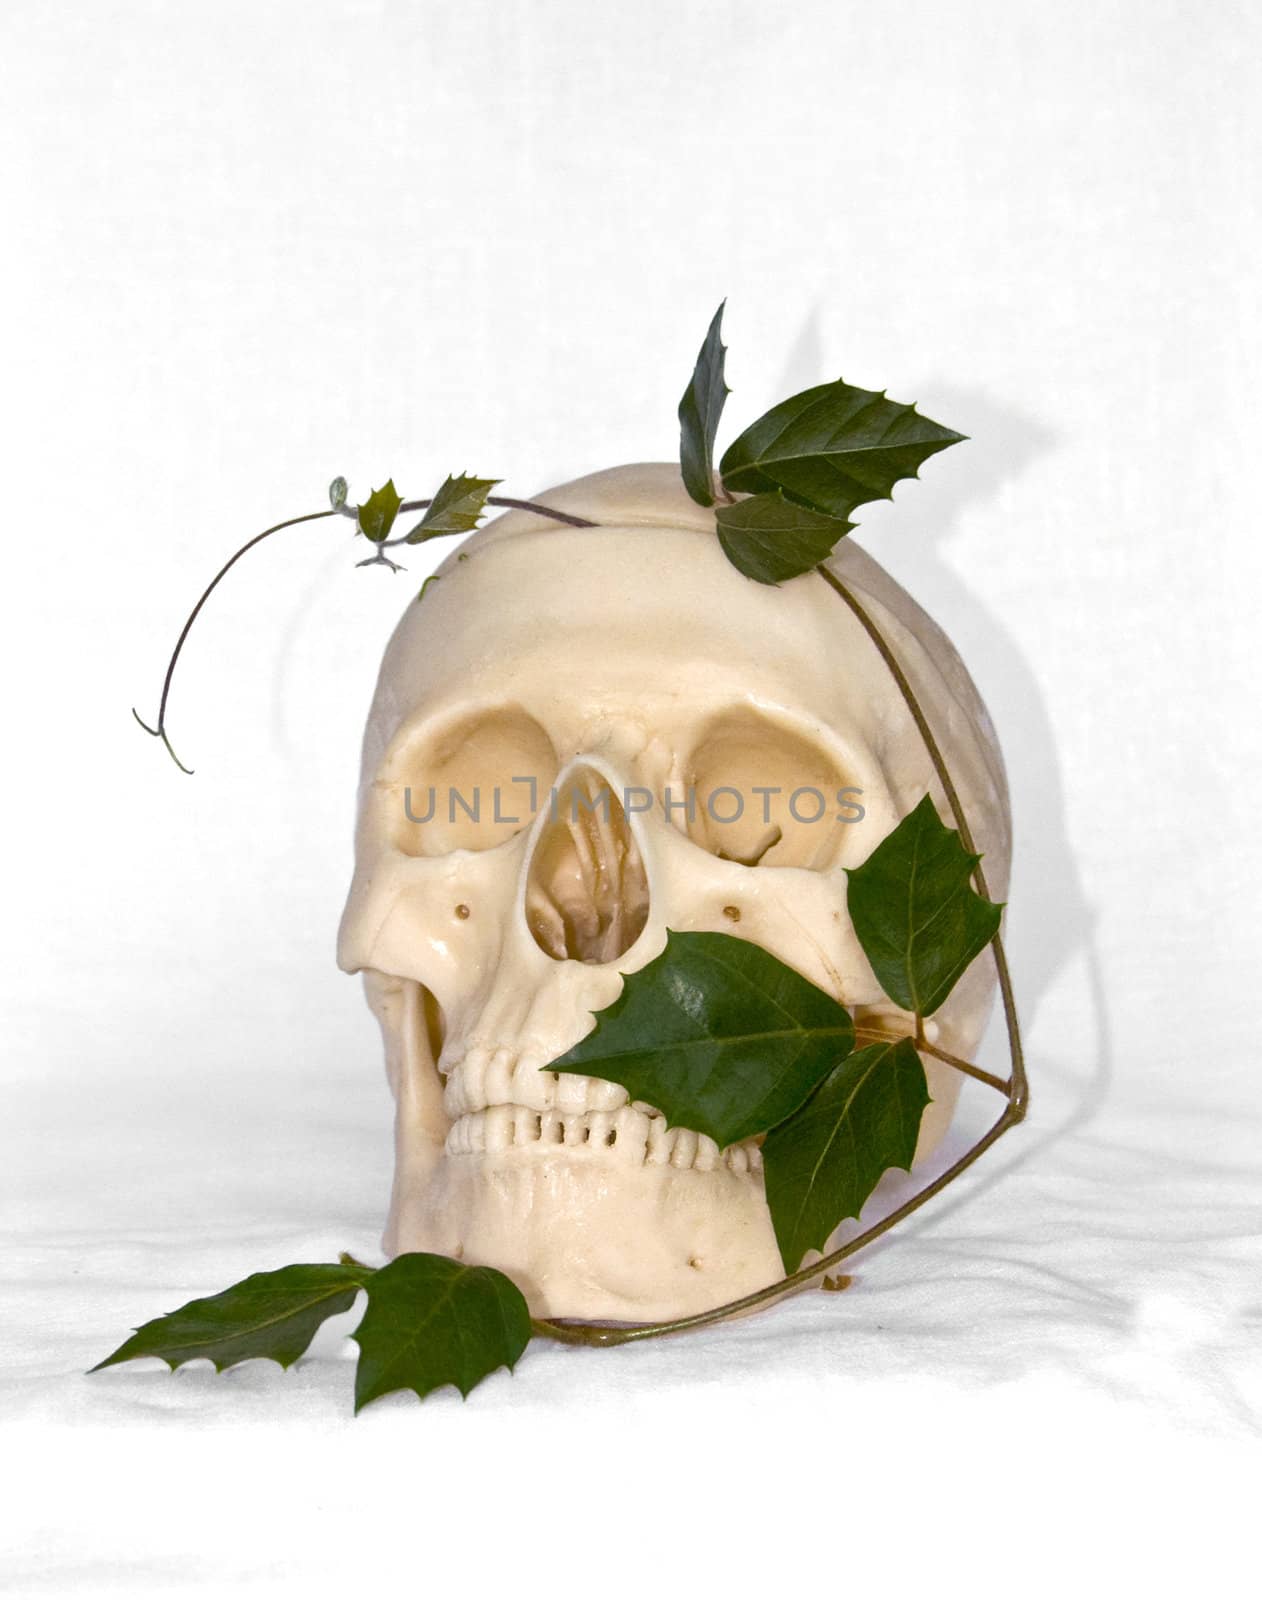 The image of a skull of the person and an ivy